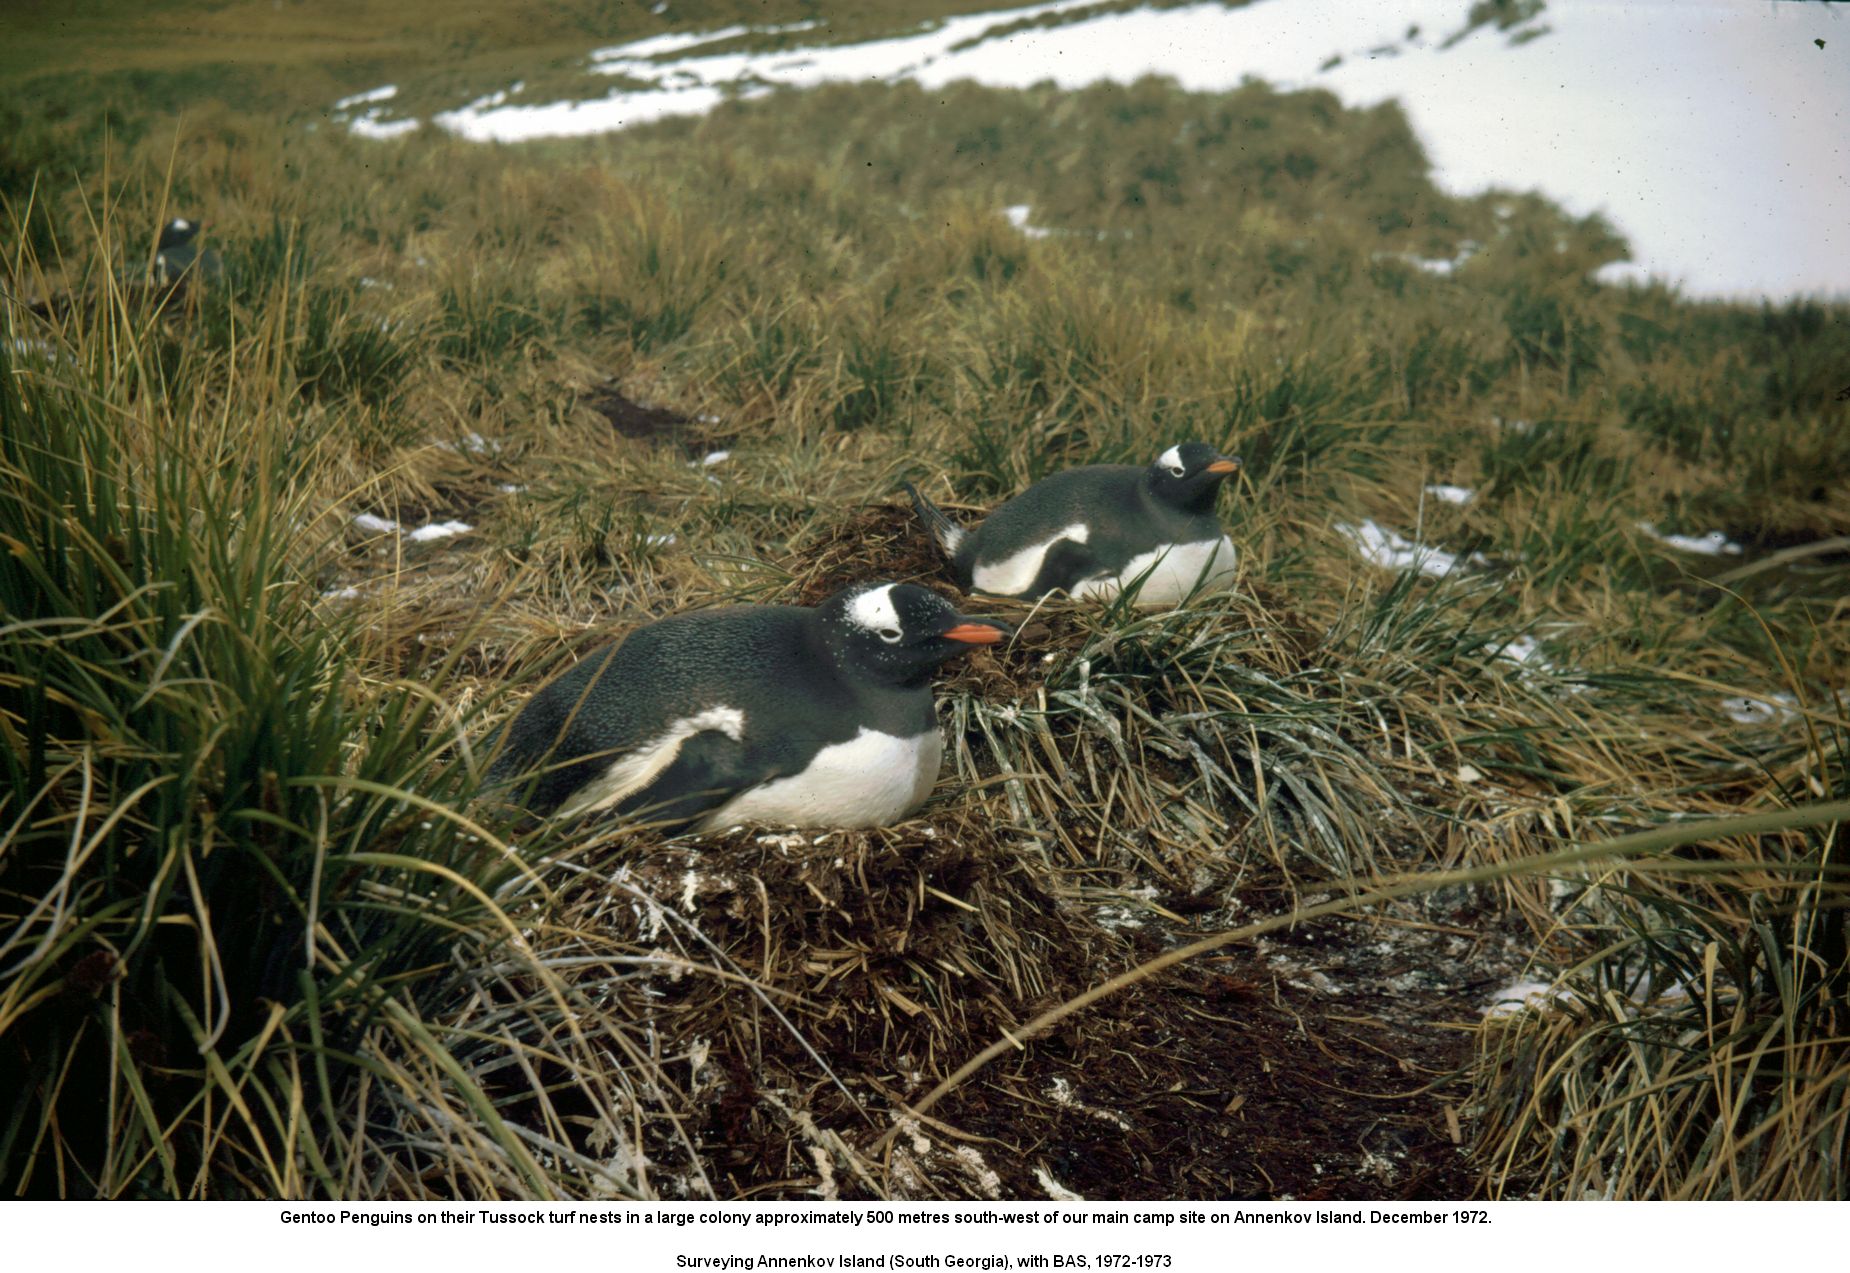 Gentoo Penguins on theirTussock turf nests in a large colony approximately 500 metres south-west of our main camp site on Annenkov Island. December 1972.